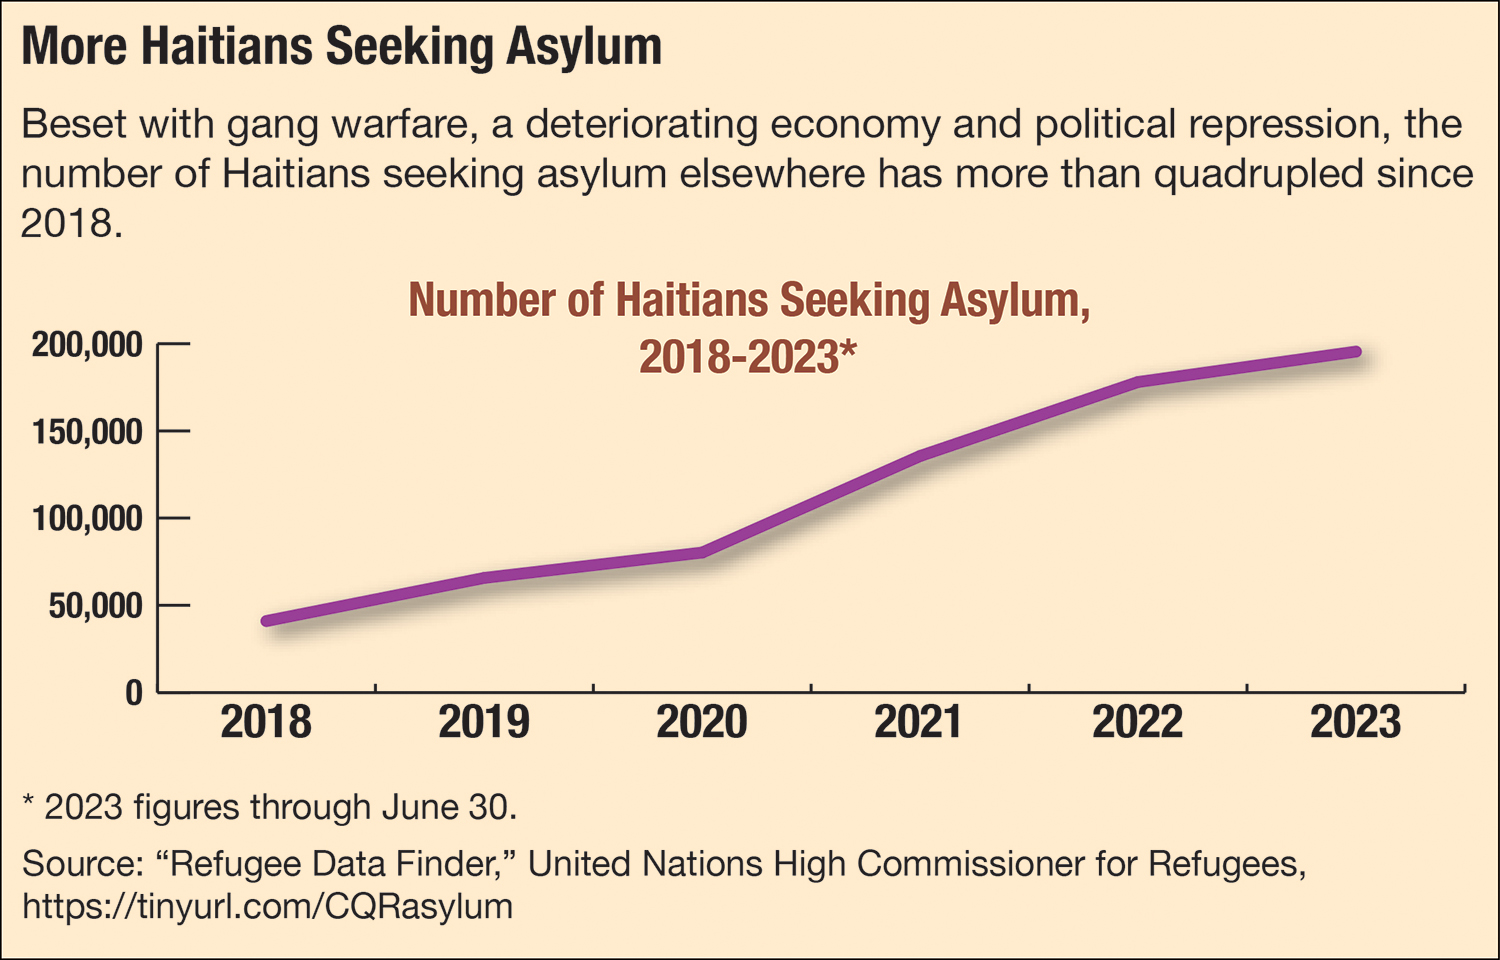 The line graph shows the number of Haitians seeking asylum from 2018 to 2023.